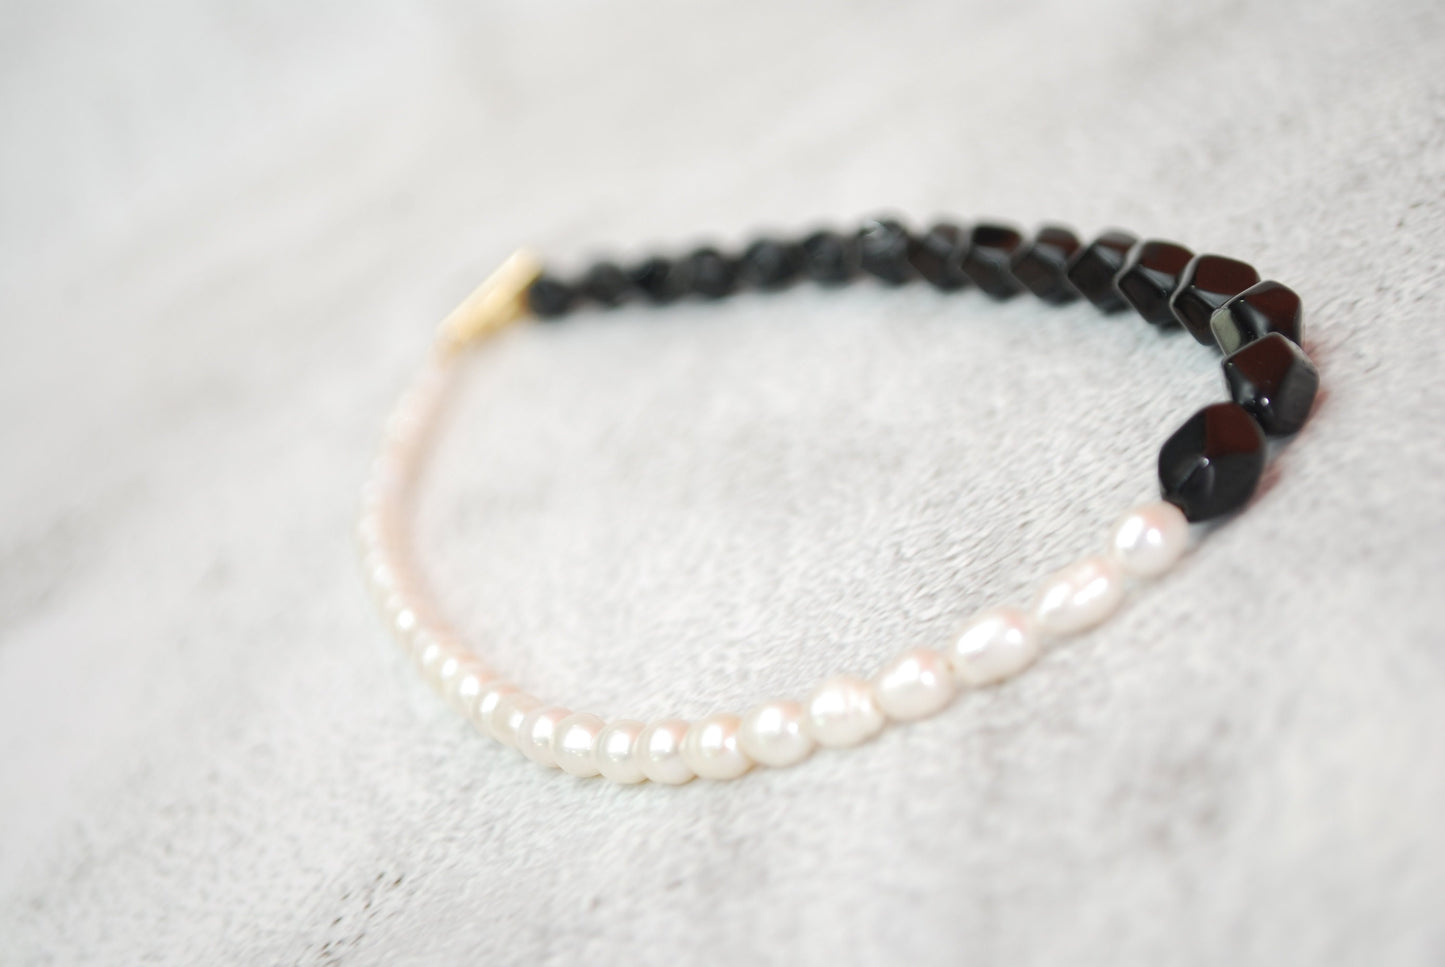 Back and white necklace, half freshwater pearl & half black glass beads choker necklace, classic style 42cm 17"